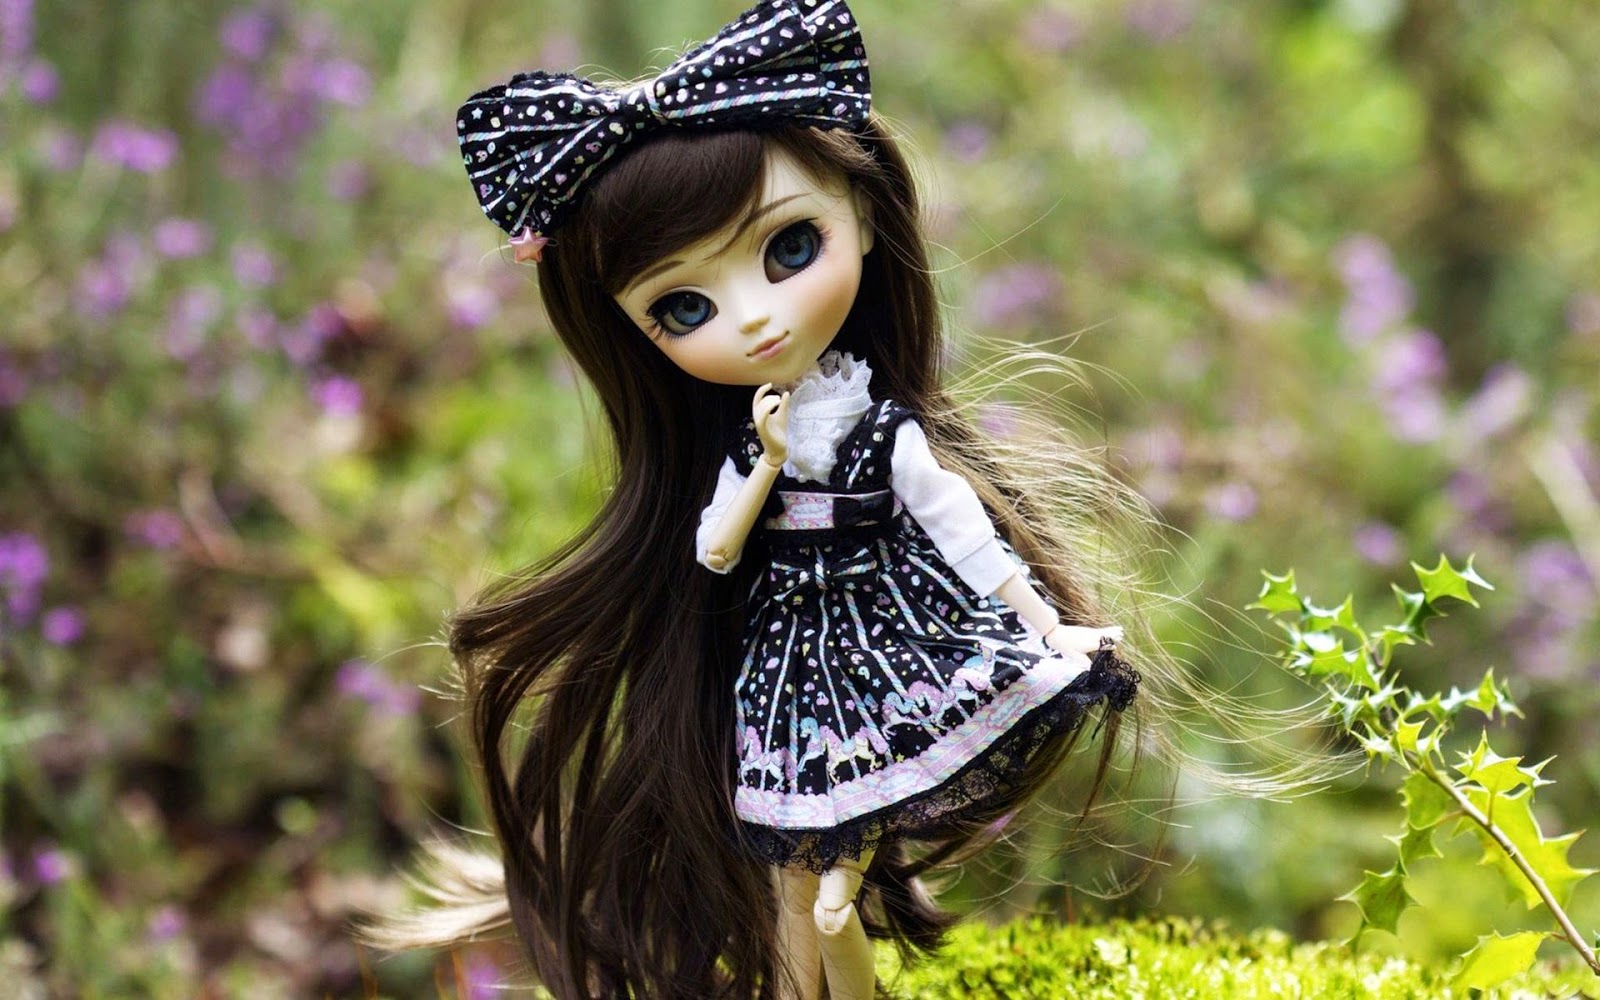  Cute  Doll   Best Wallpapers  4 you